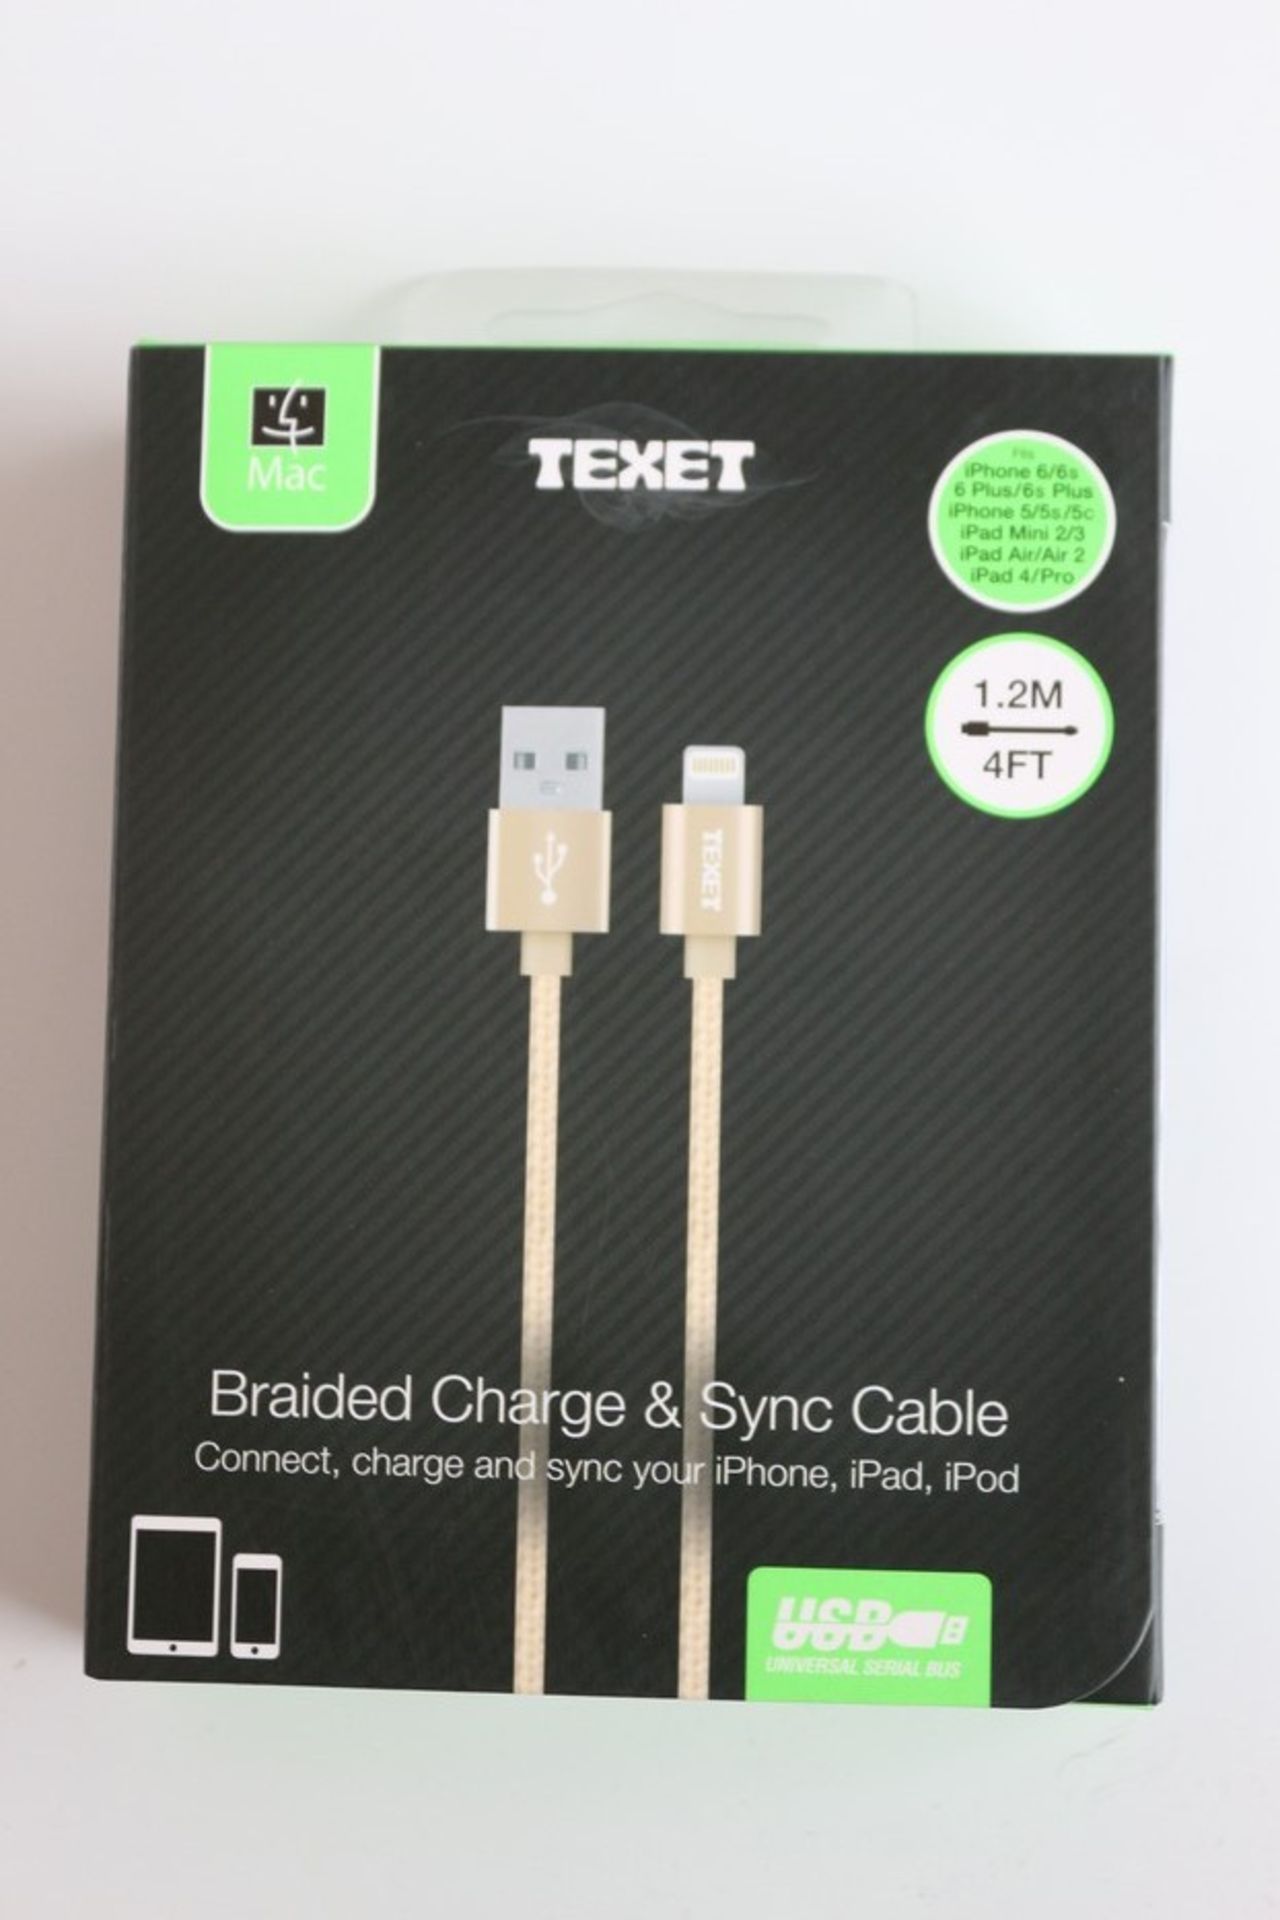 10X BOXED UNUSED FACTORY SEALED TEXET 1.2M/4FT BRAIDED CHARGE & SYNC CABLES USB- IPHONE/IPAD/IPOD